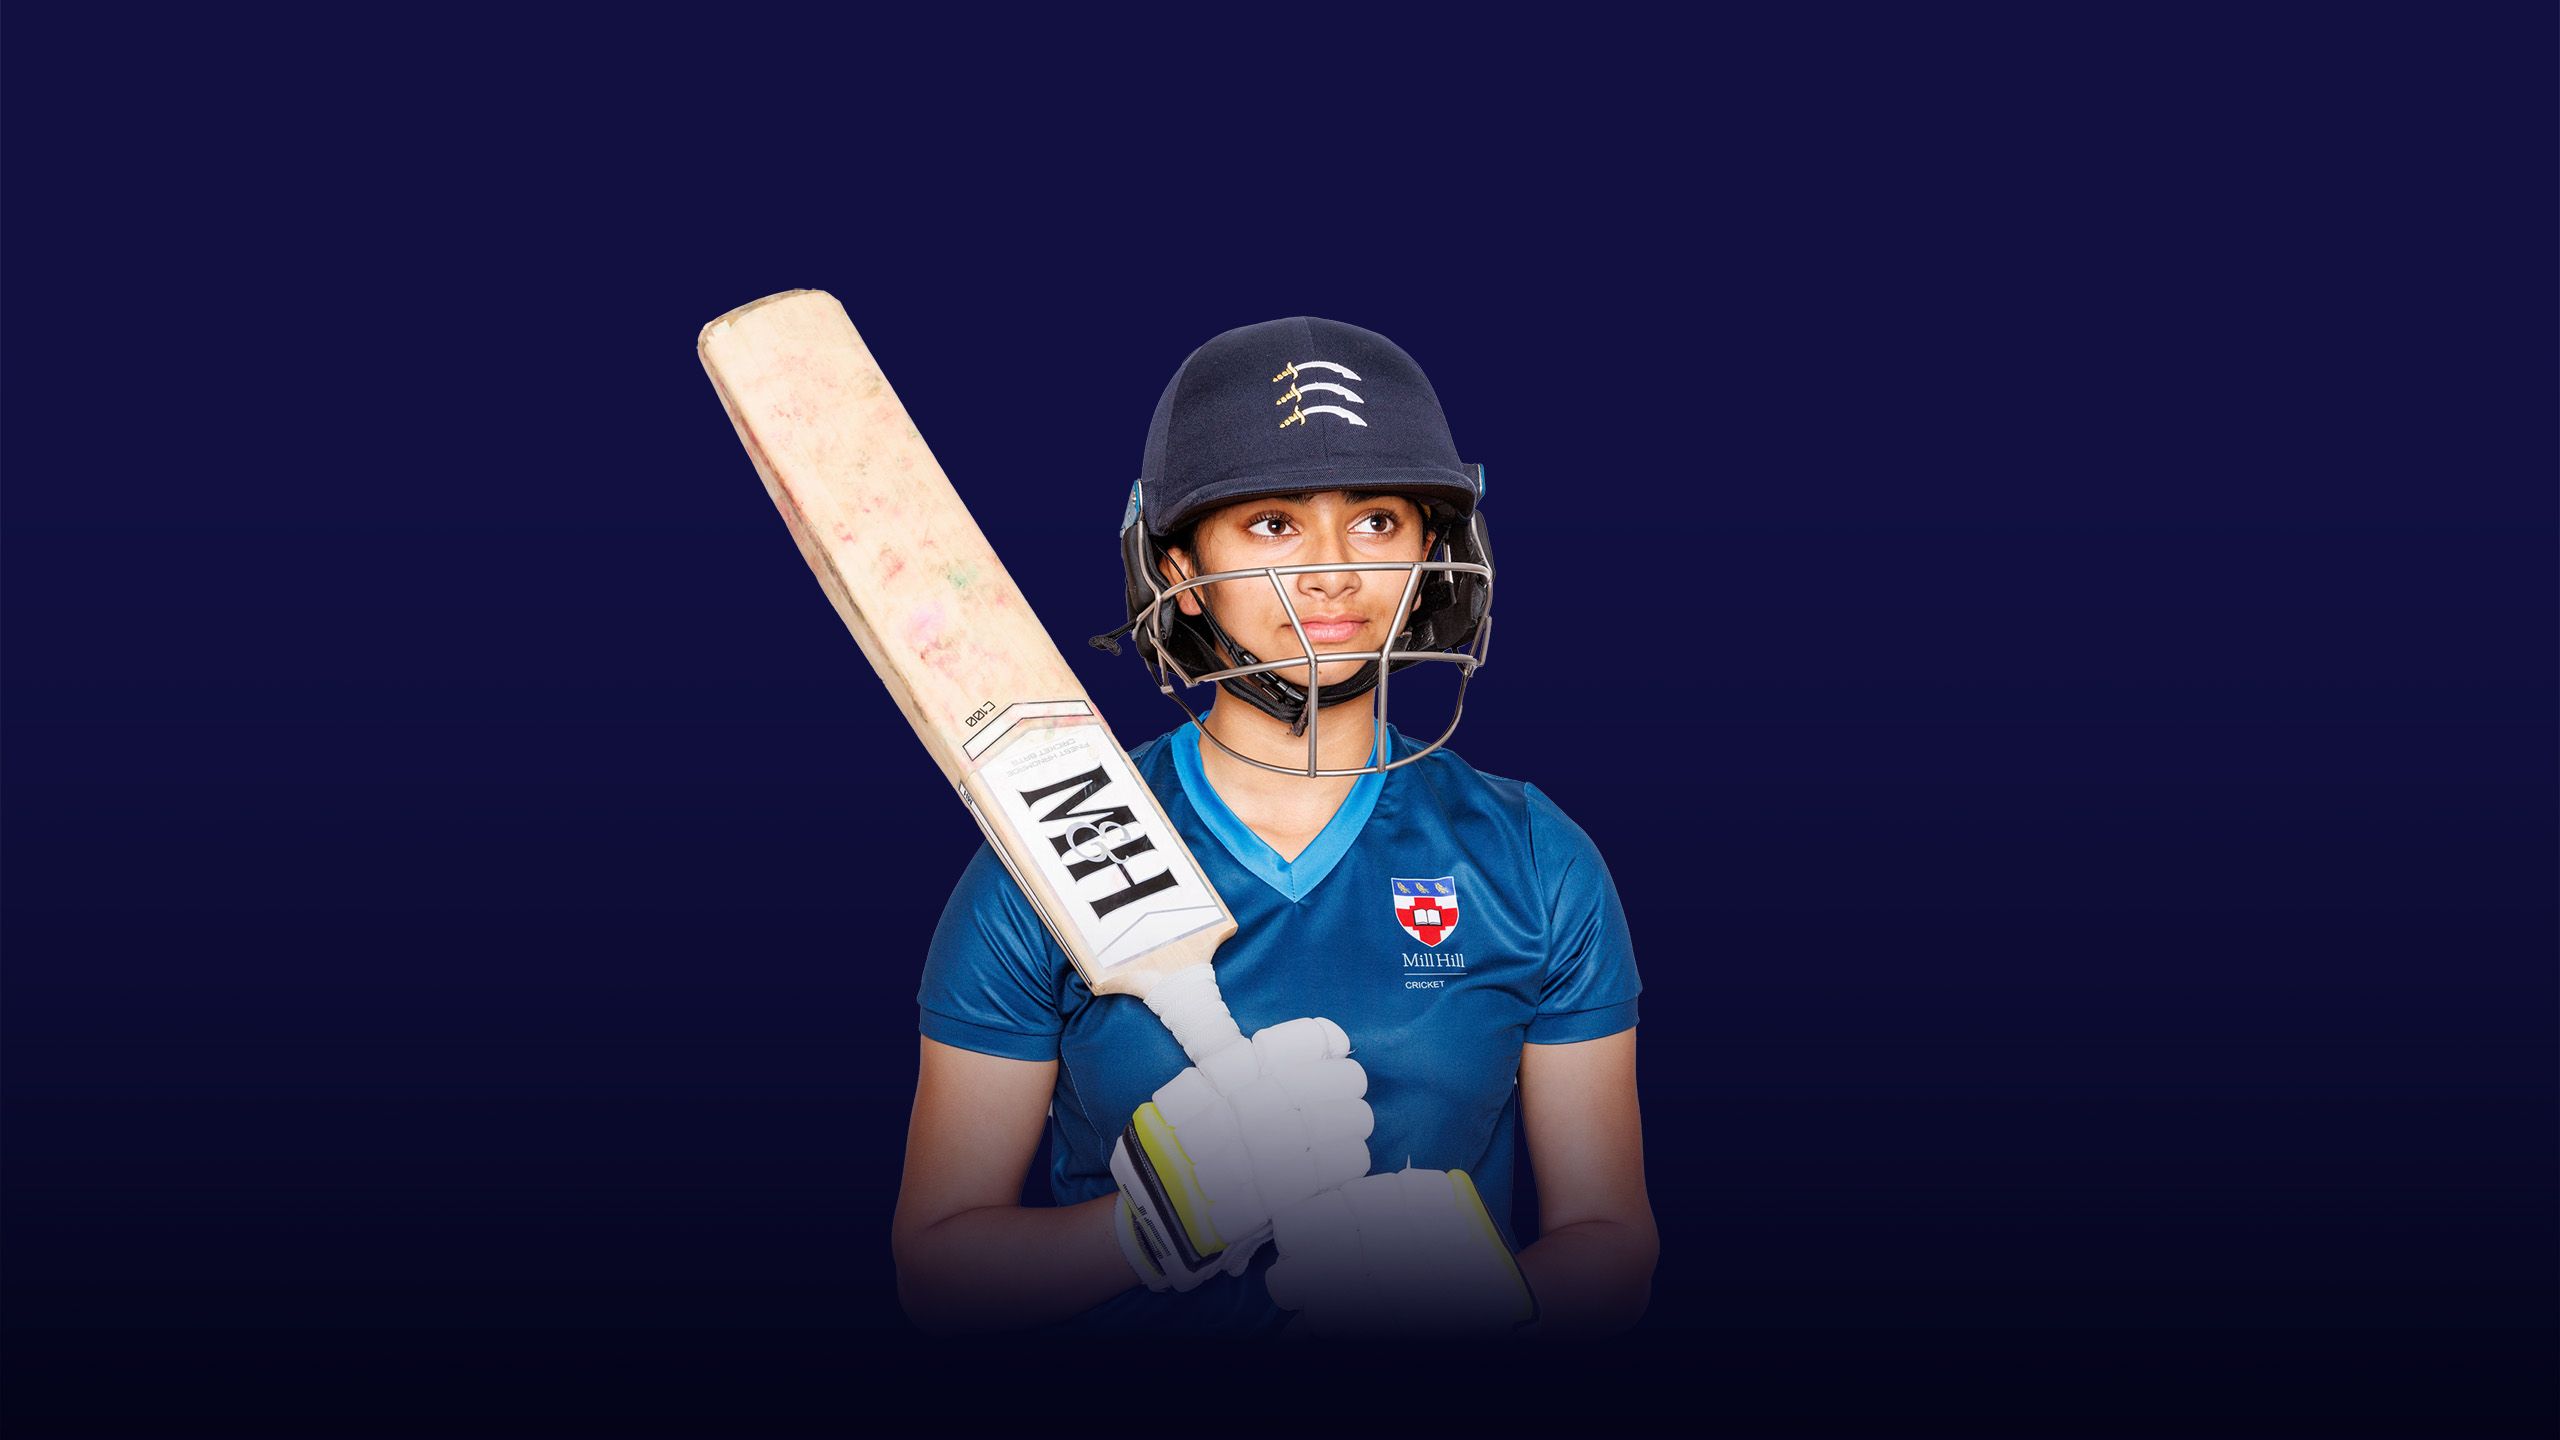 A girl against a dark background holding a cricket bat and wearing a cricket helmet with an overlay of the text instilling values 